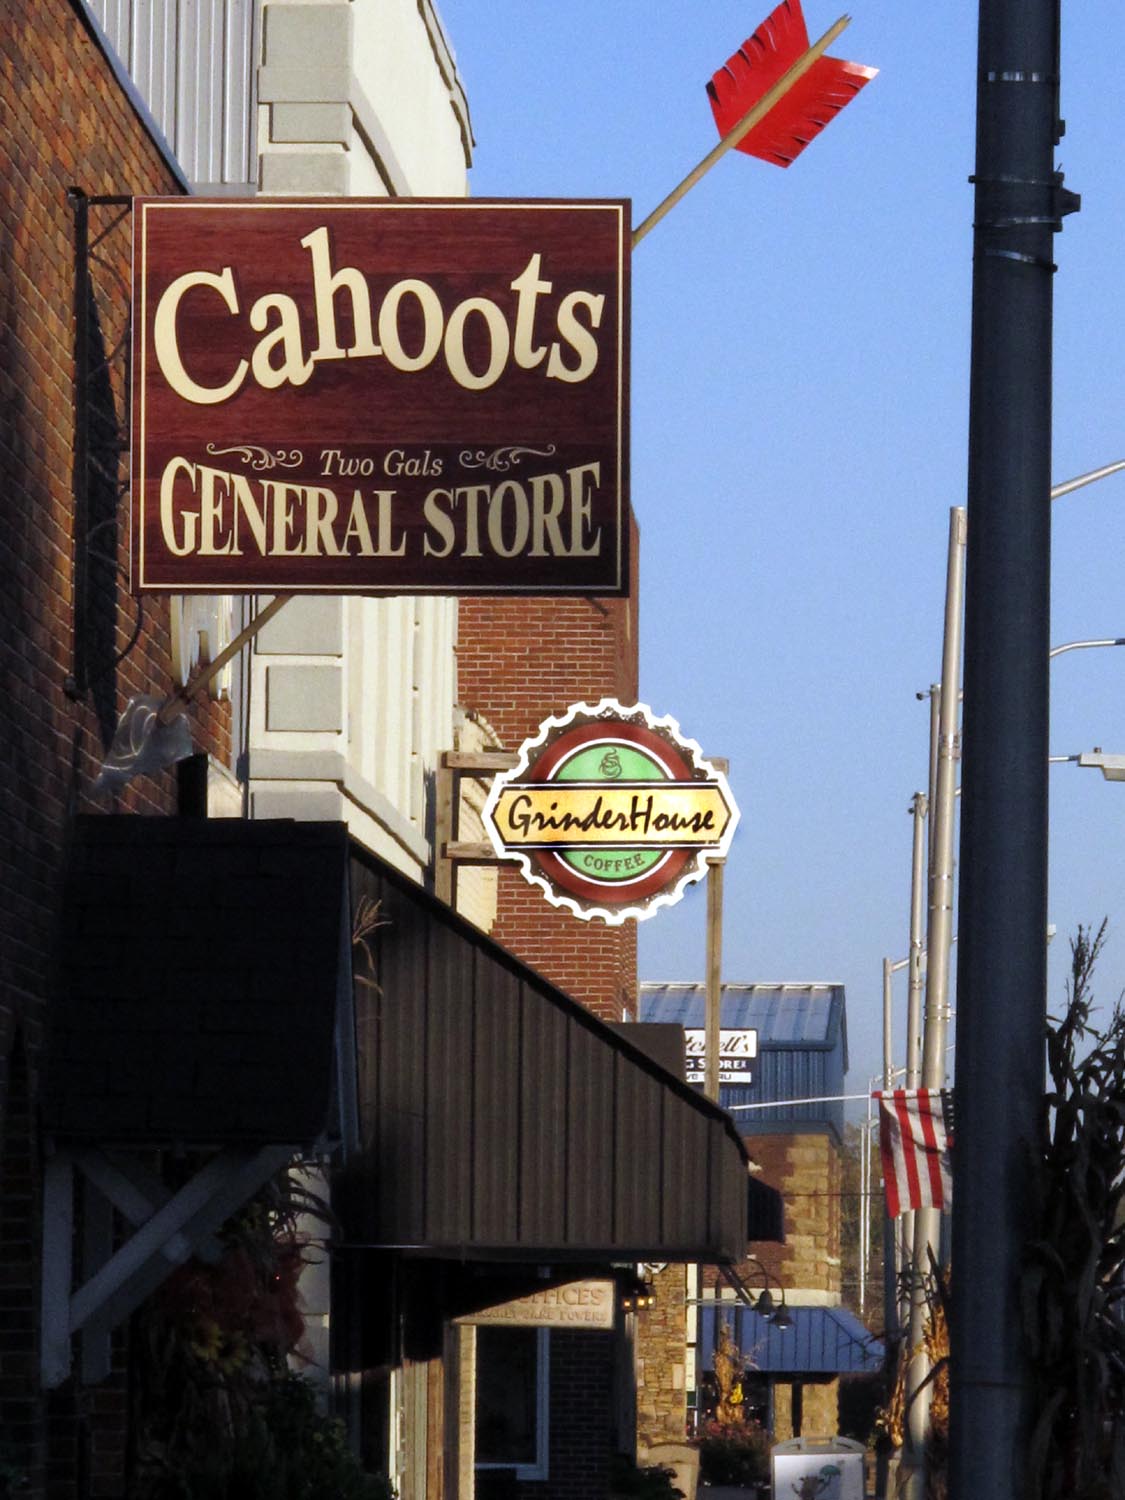 Cahoots-Two Gals General Store